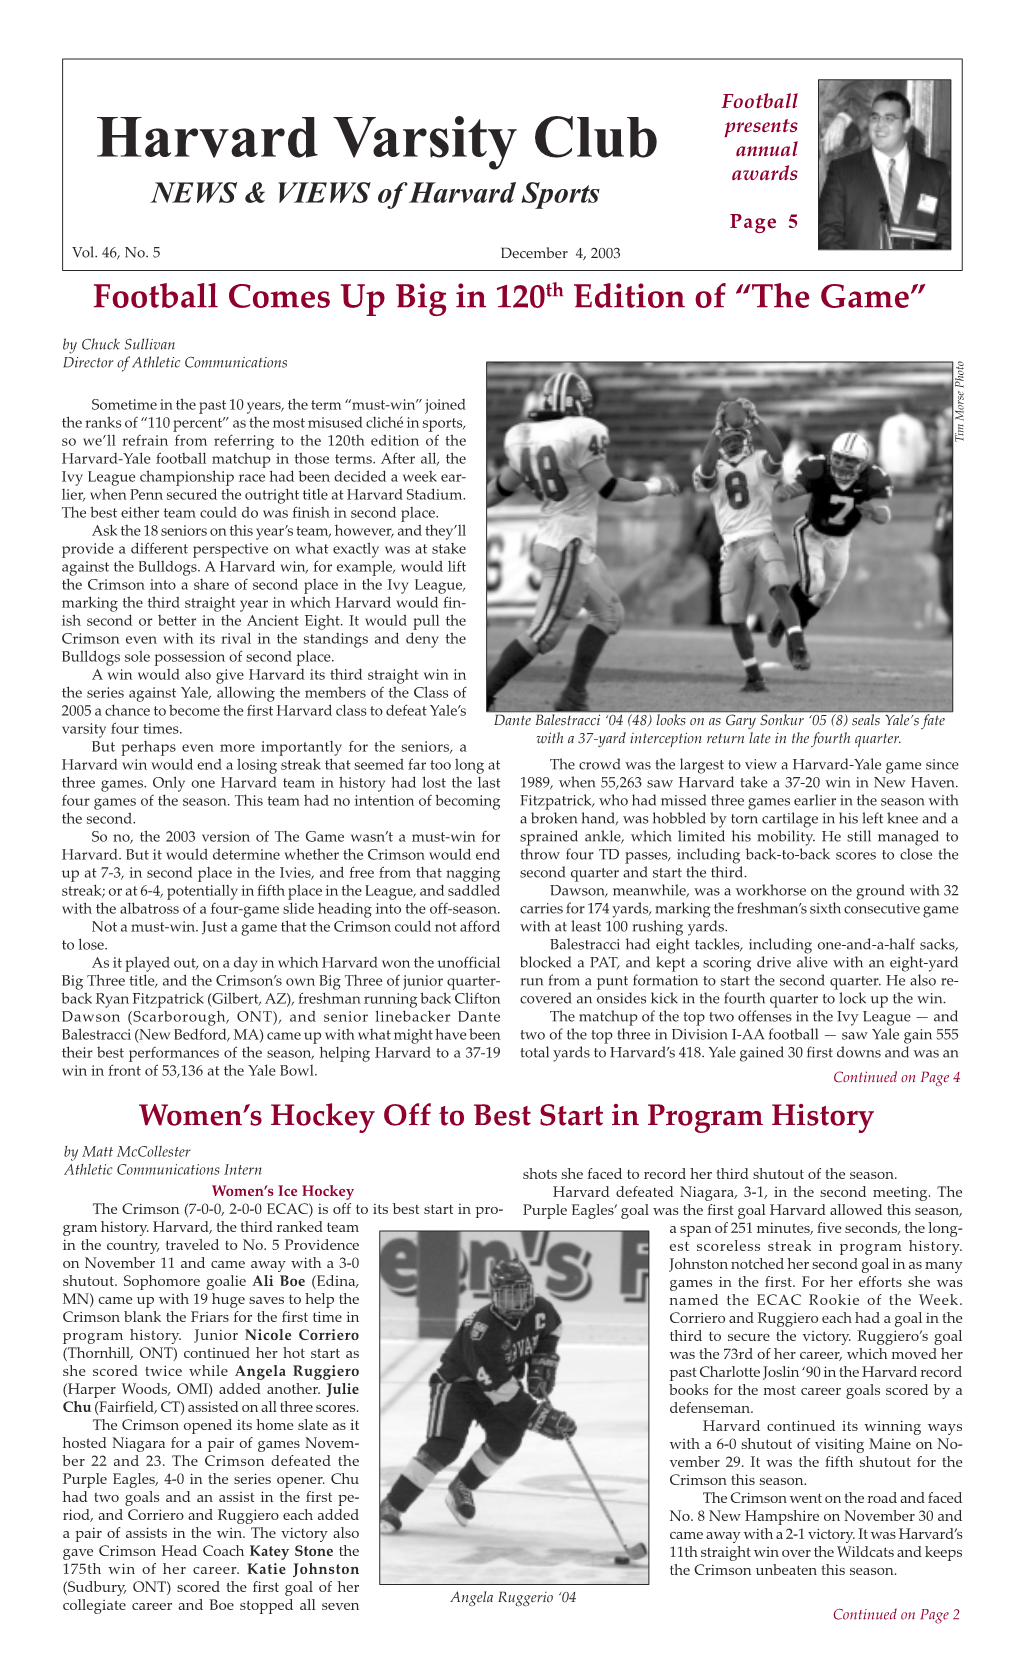 Football Comes up Big in 120Th Edition of “The Game” by Chuck Sullivan Director of Athletic Communications